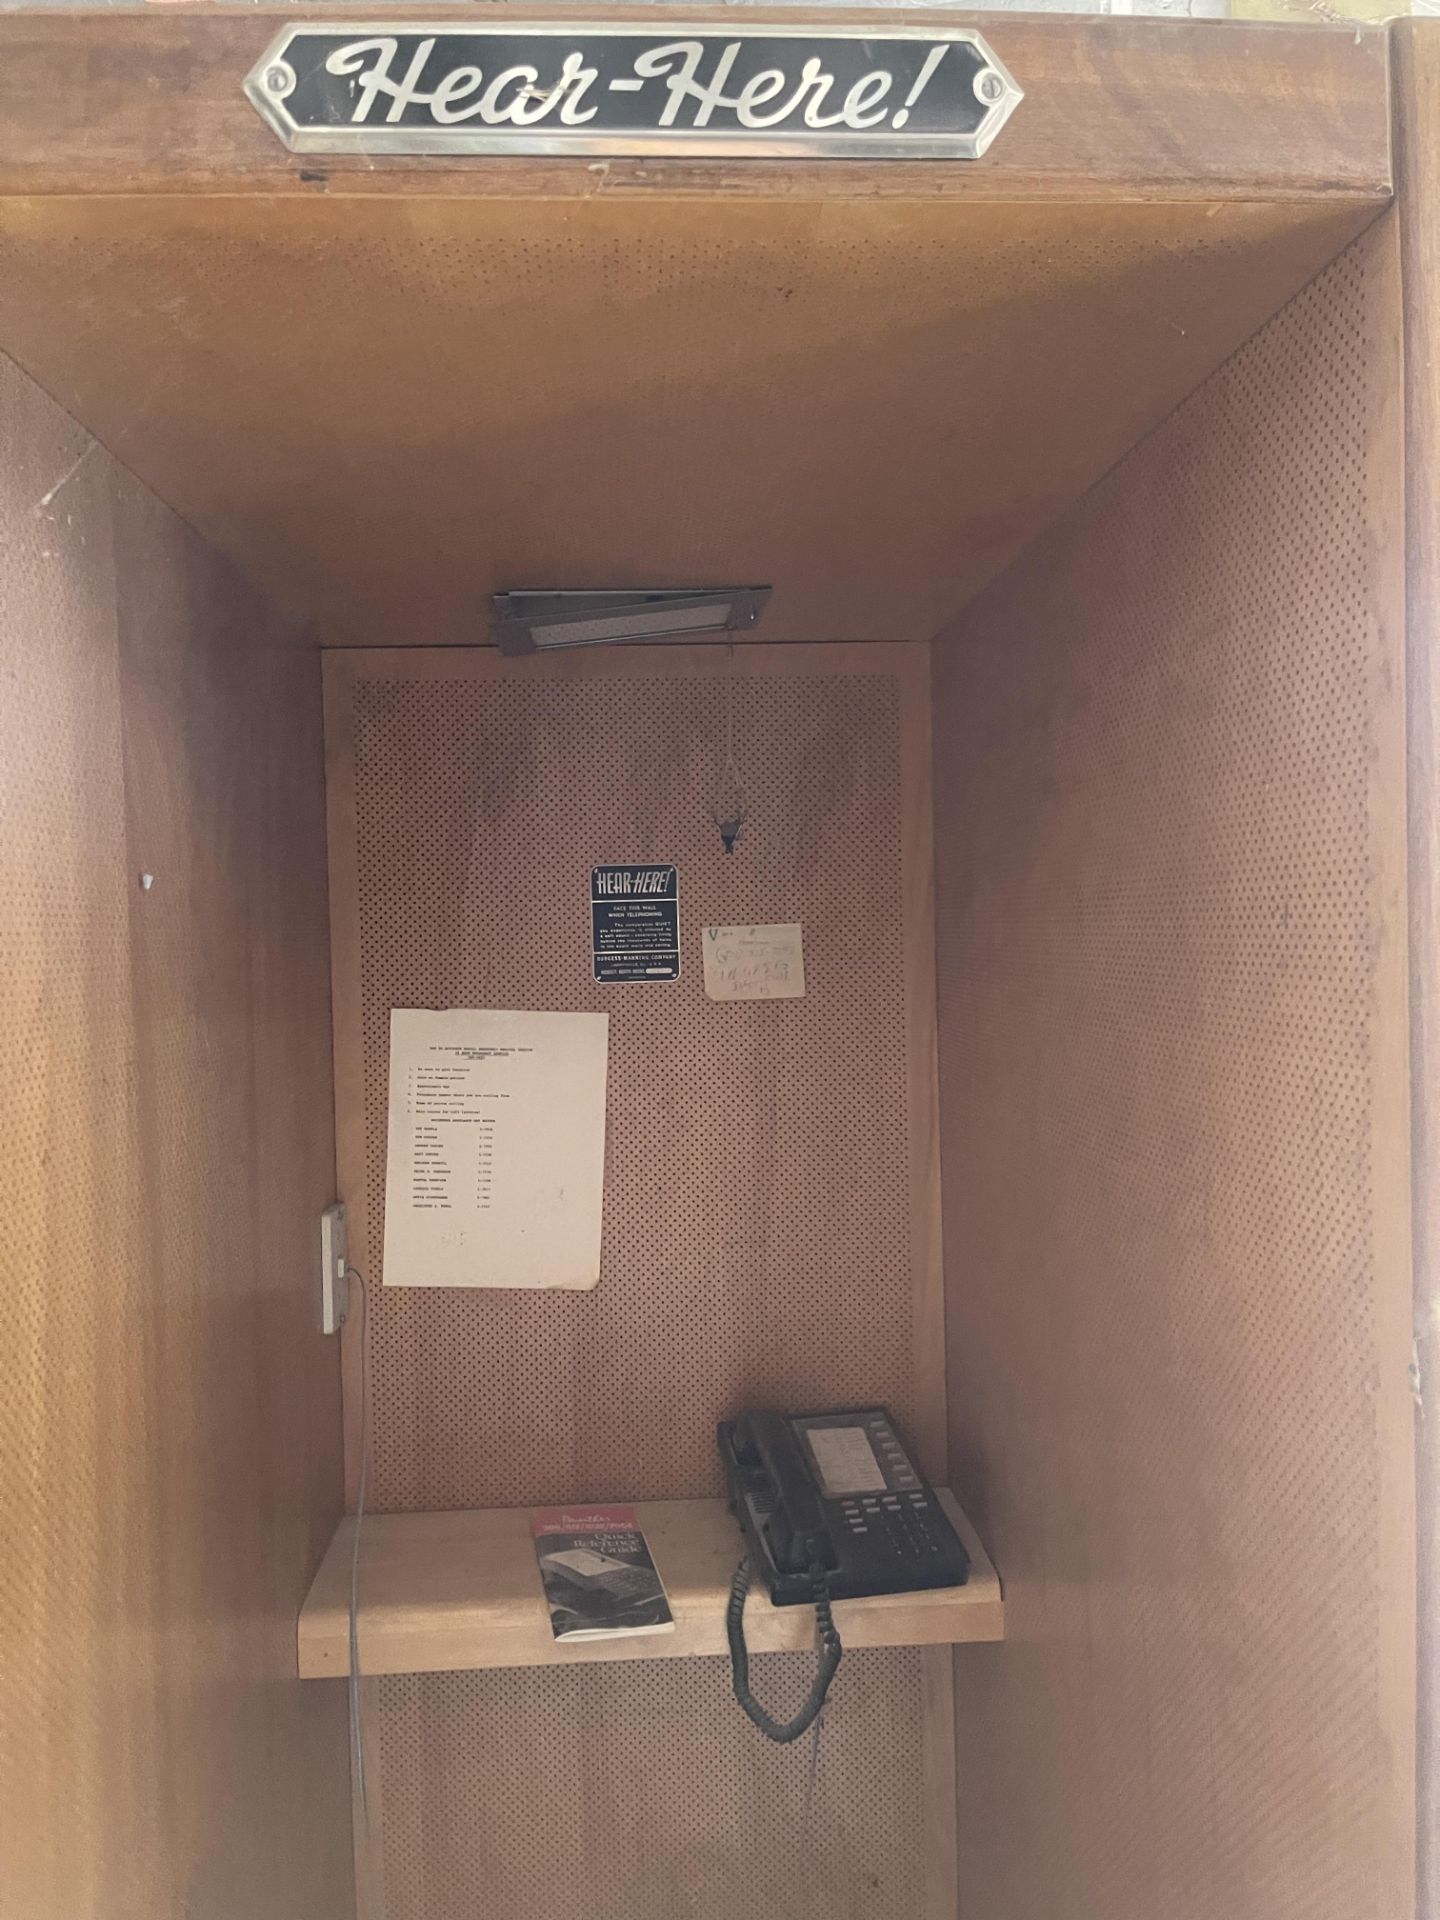 HEAR HERE PRIVATE QUIET TELEPHONE BOOTH BURGESS MANNING COMPANY ACOUSTIC BOOTH - Image 2 of 4